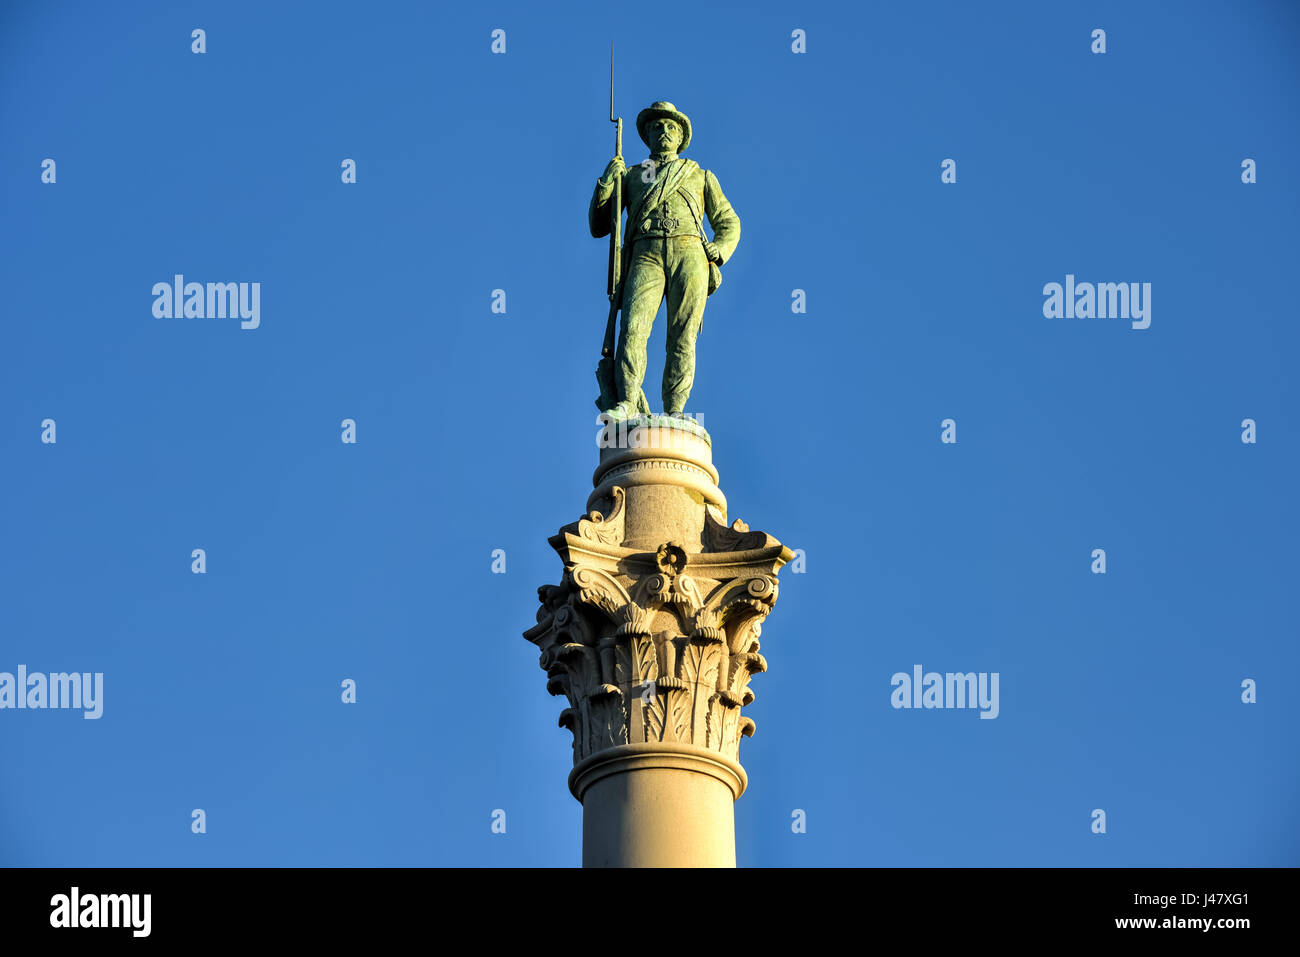 Confederate Soldiers' & Sailors' Monument. It depicts a bronze Confederate private standing on top of the pillar, which is composed of 13 granite bloc Stock Photo